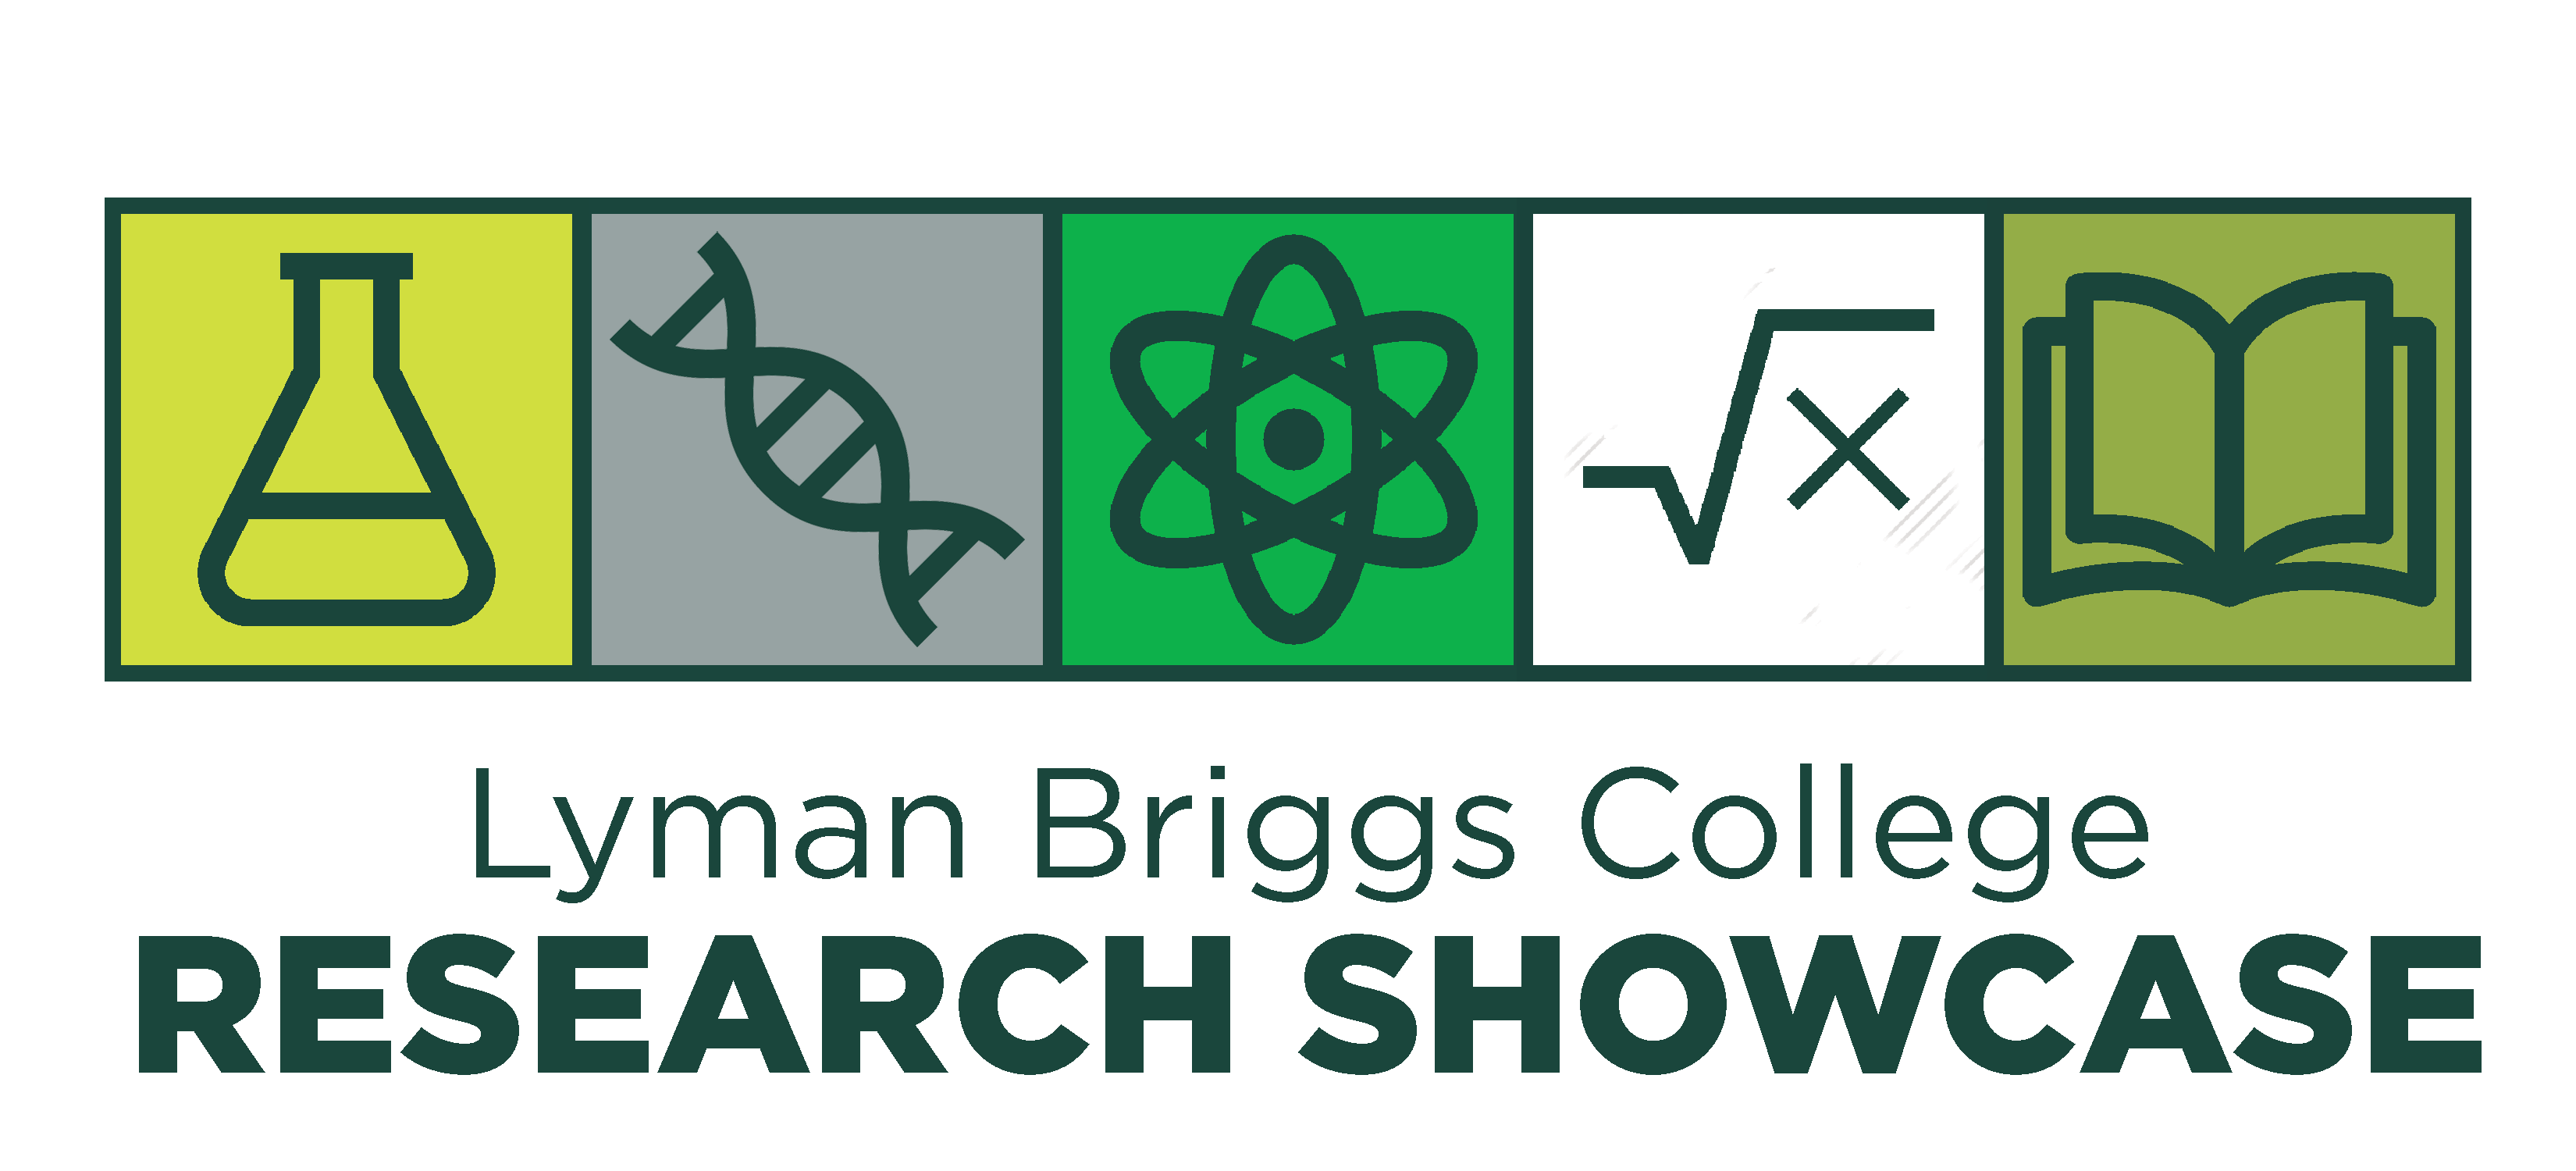 scientific icons with the words "Lyman Briggs College Research Showcase